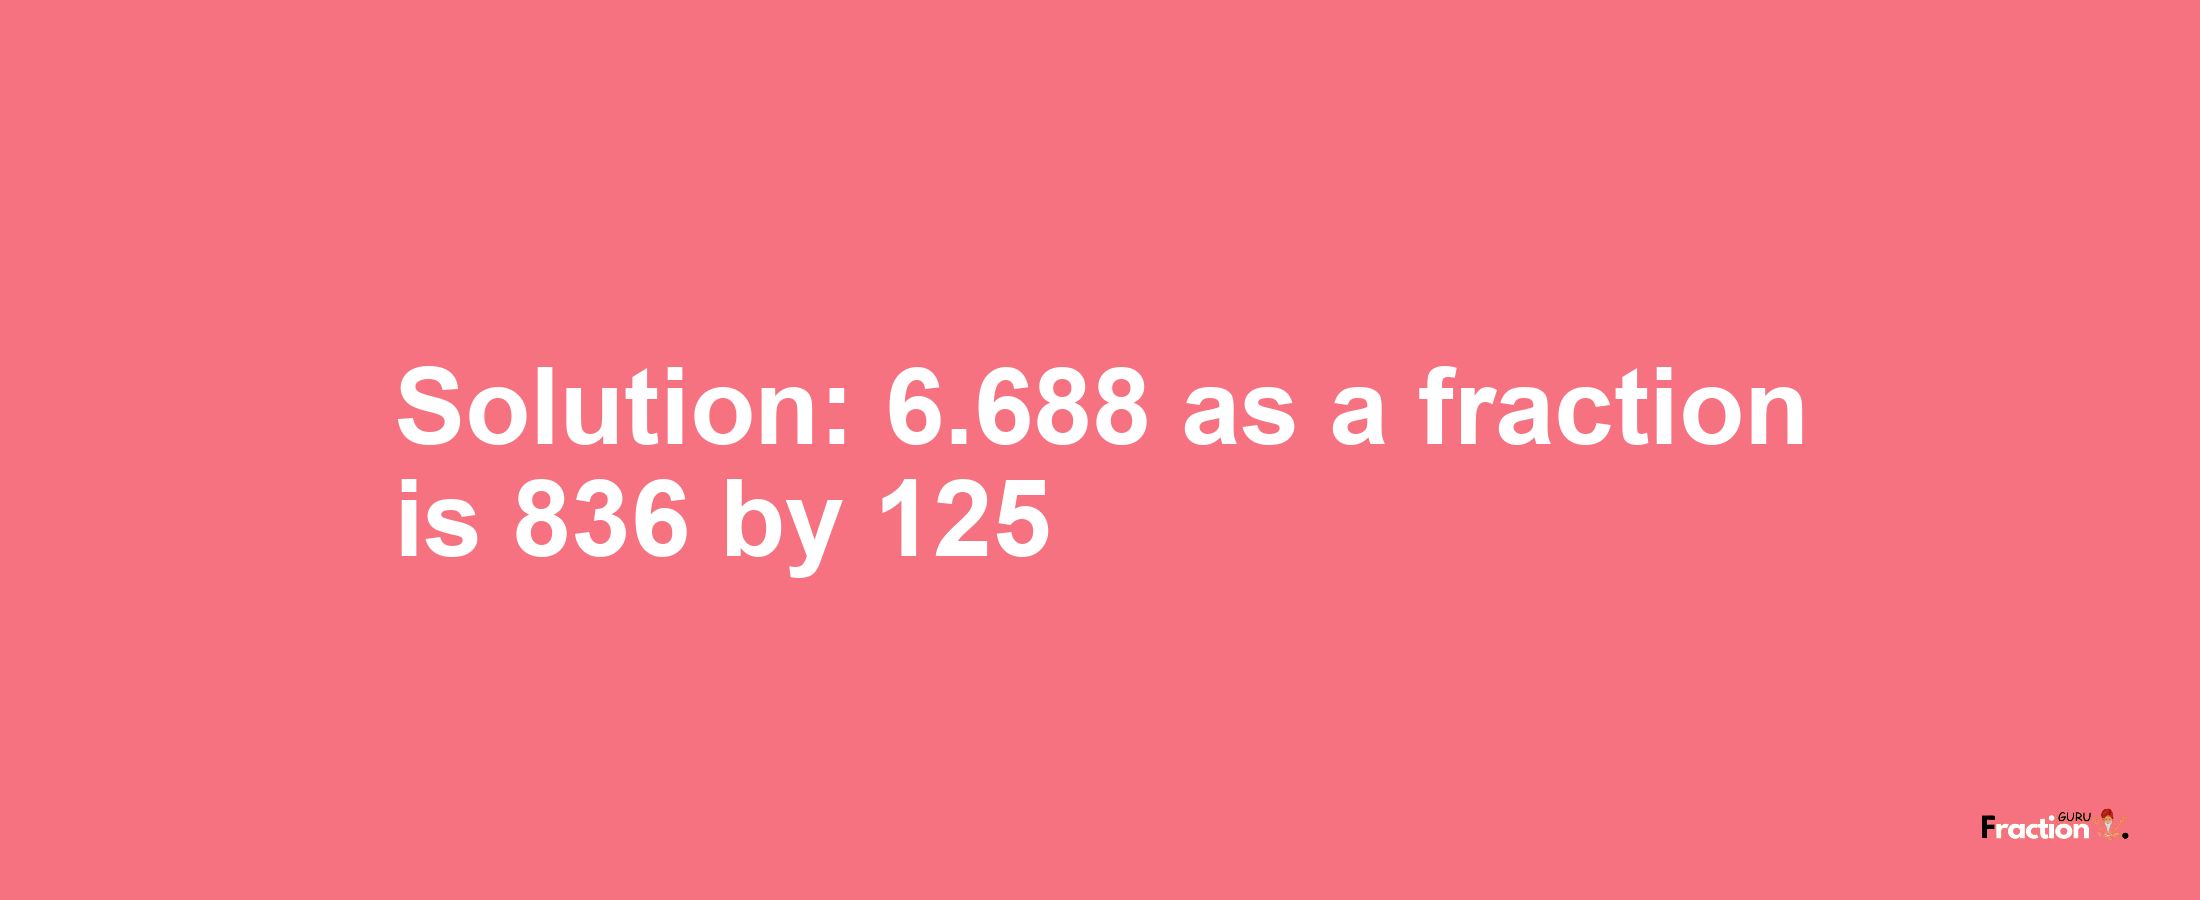 Solution:6.688 as a fraction is 836/125